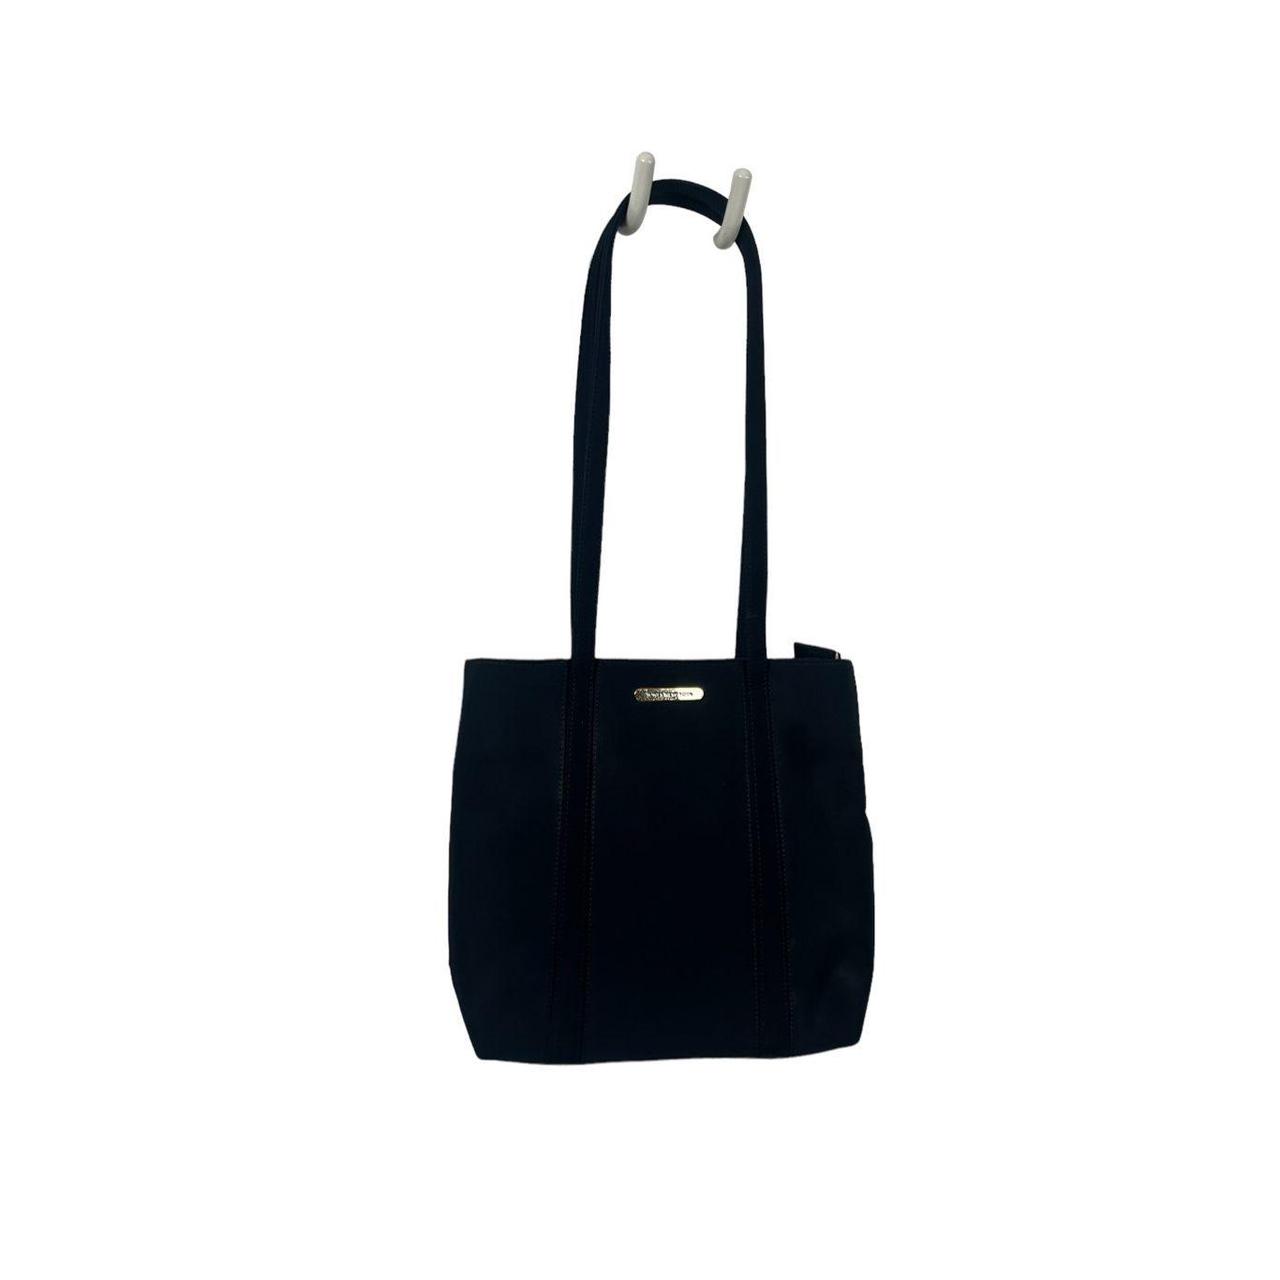 Buy Jones New York cailen large tote with zippered purse black and white  Online | Brands For Less